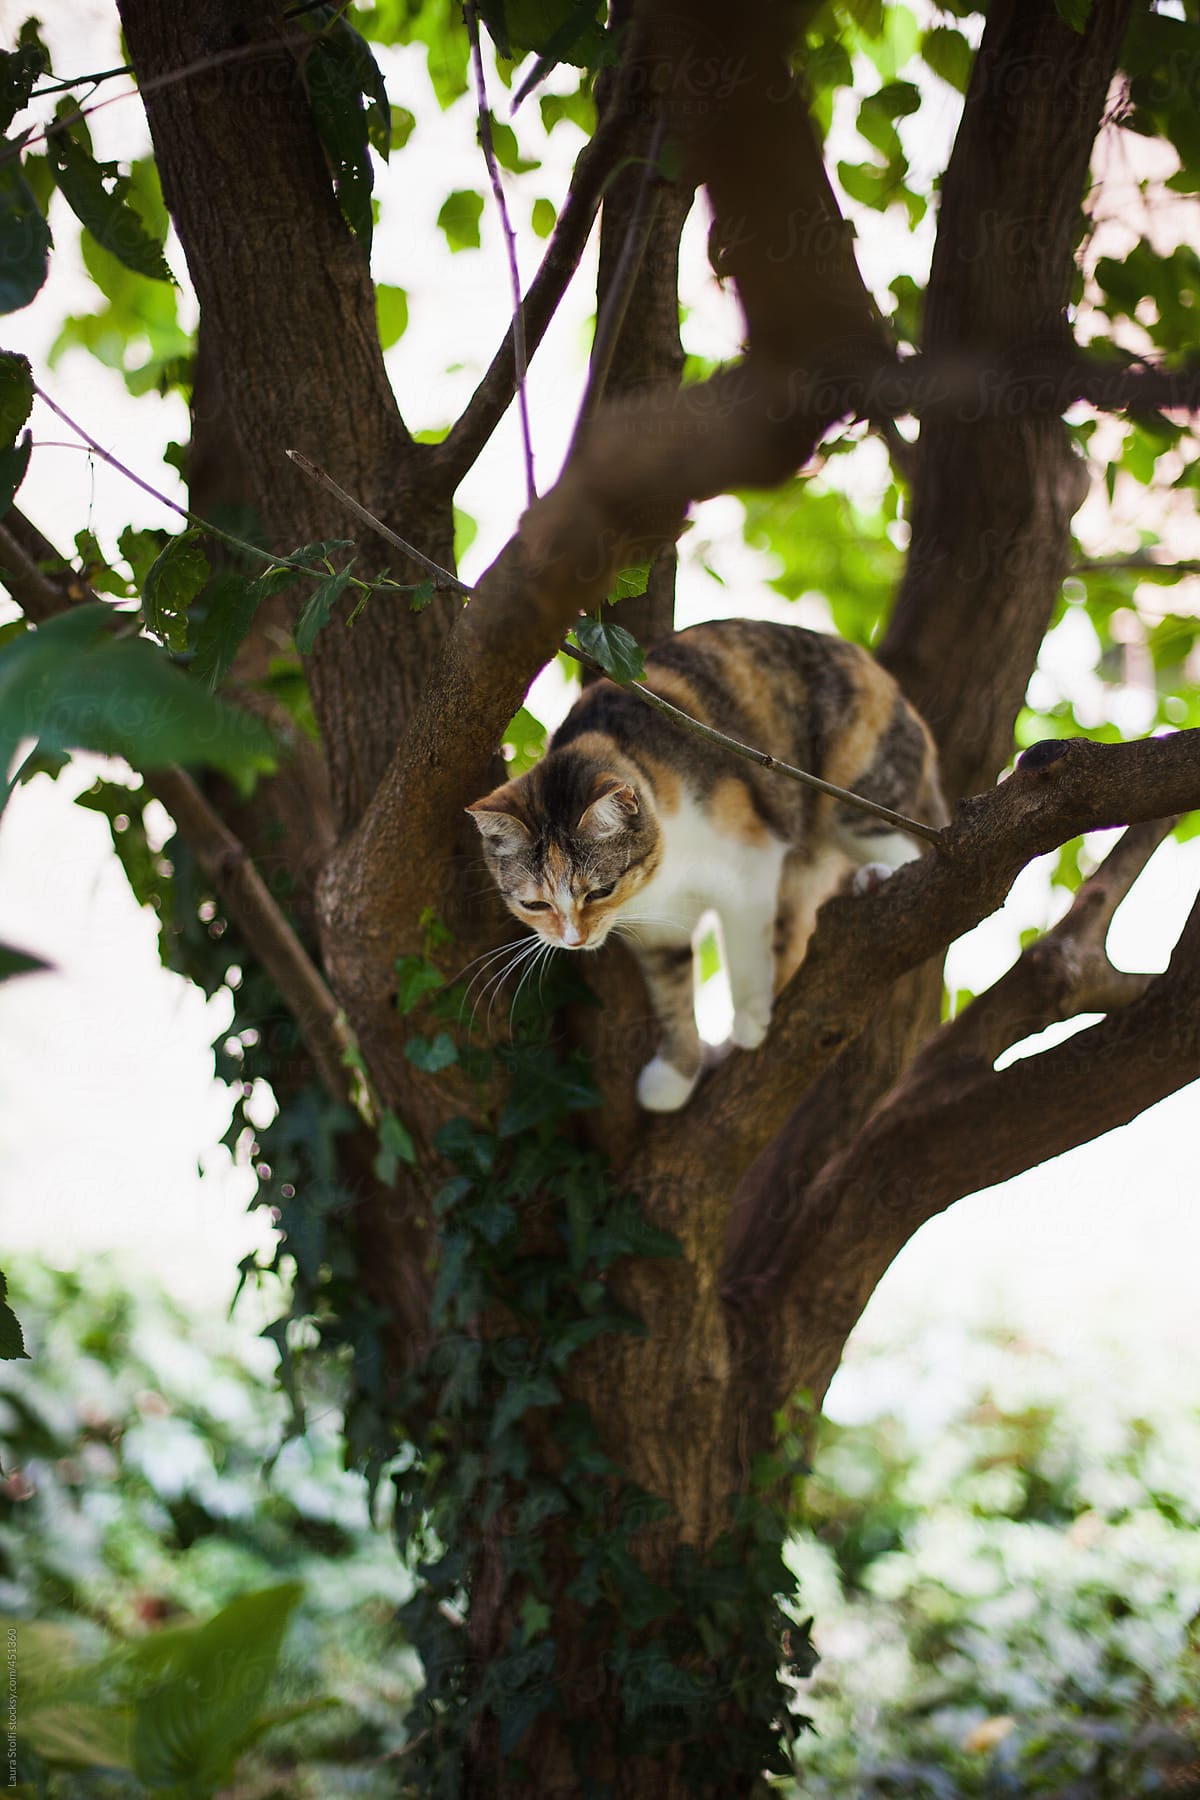 Cat coming down from tree